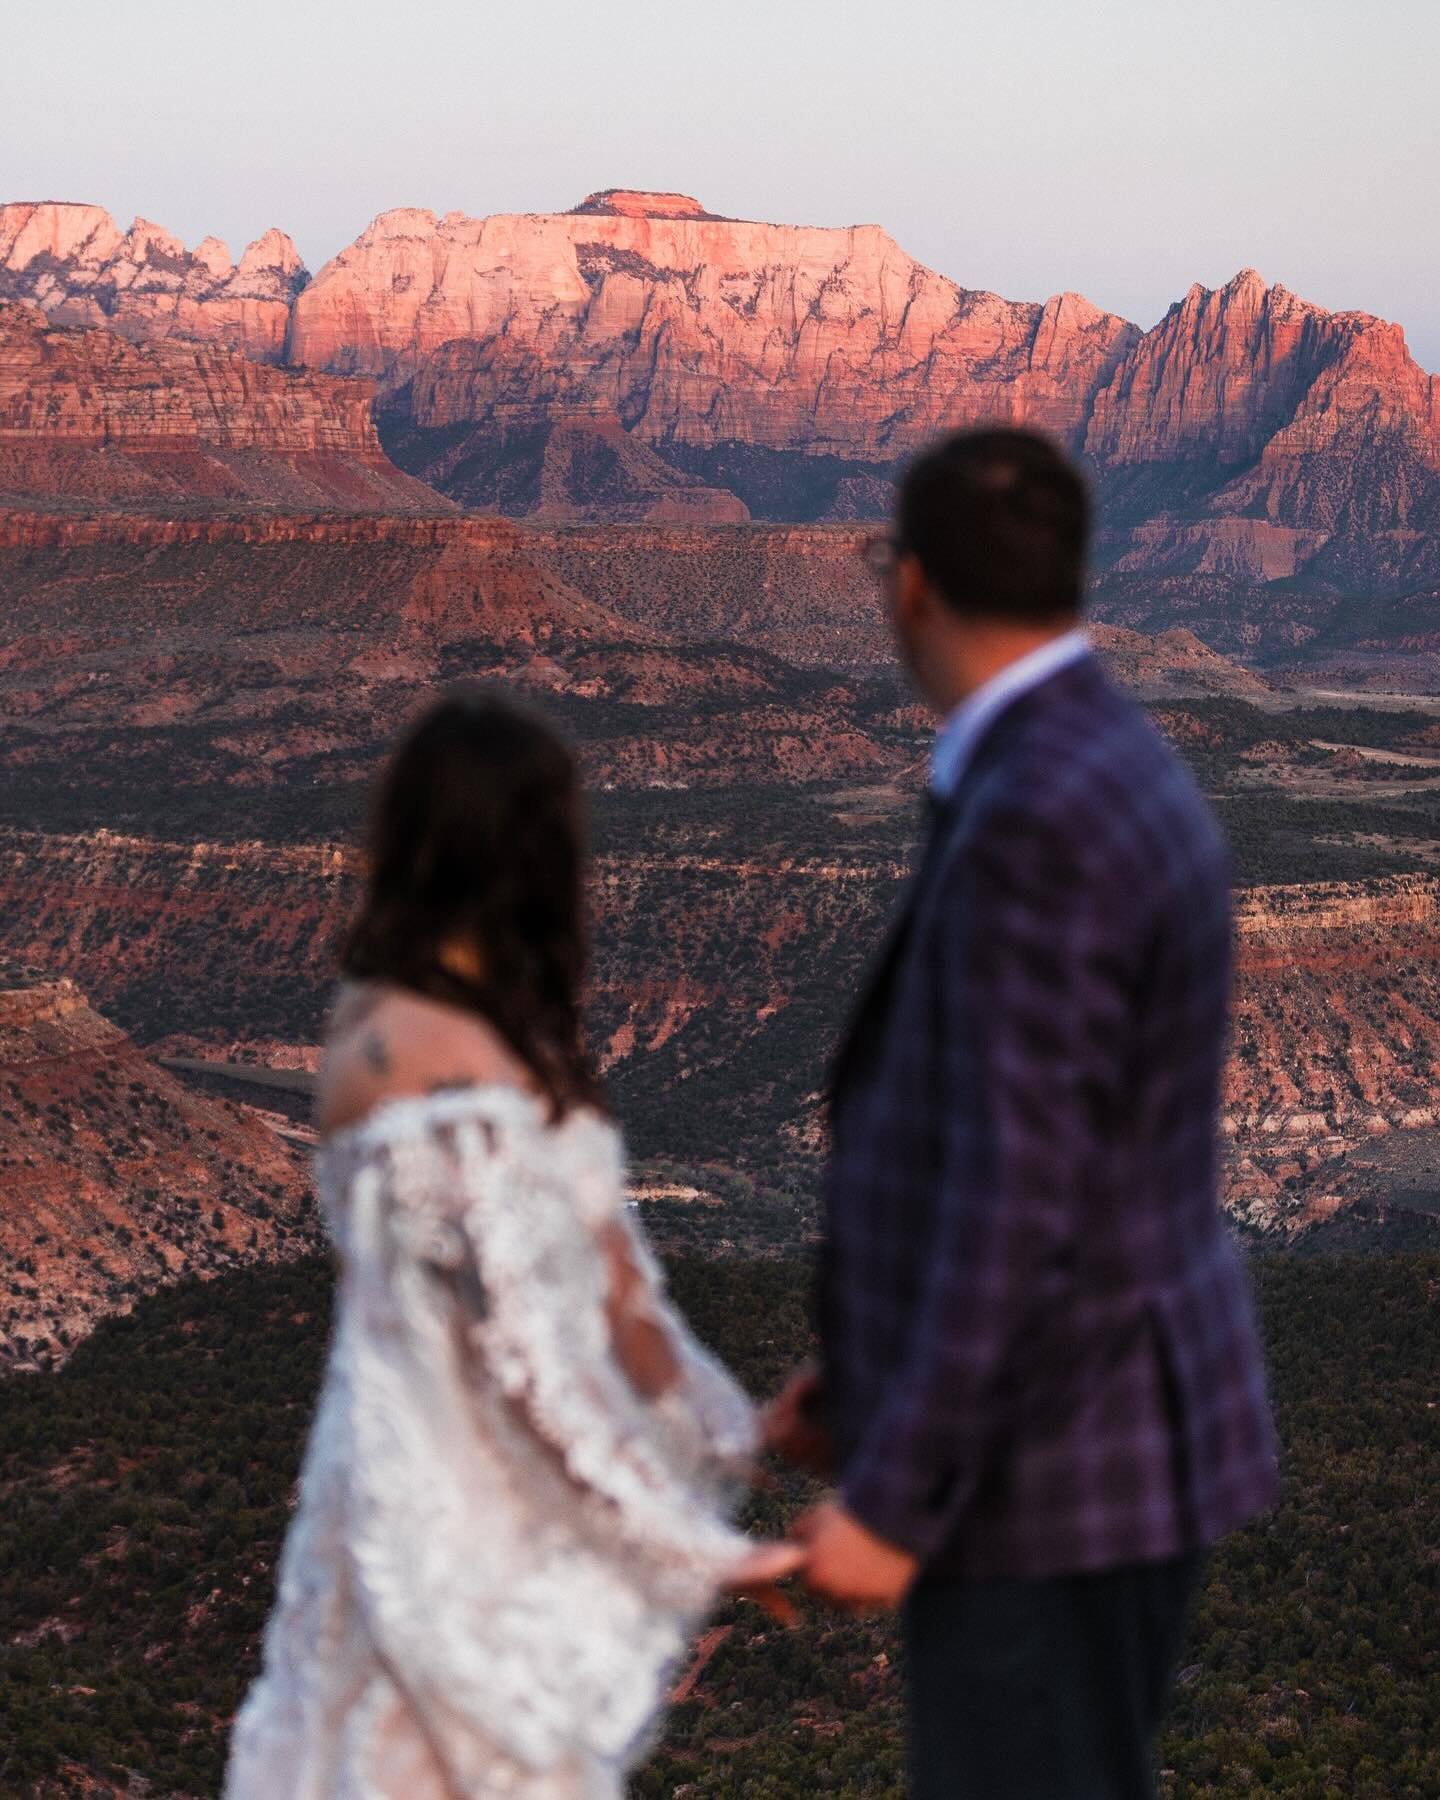 Dakota and Rachel kicked off their wedding week by exploring one of our favorite spots in Zion. They wanted somewhere private to exchange vows, and a first look before becoming husband and wife.

As we drove up the winding dirt road to this vista, th